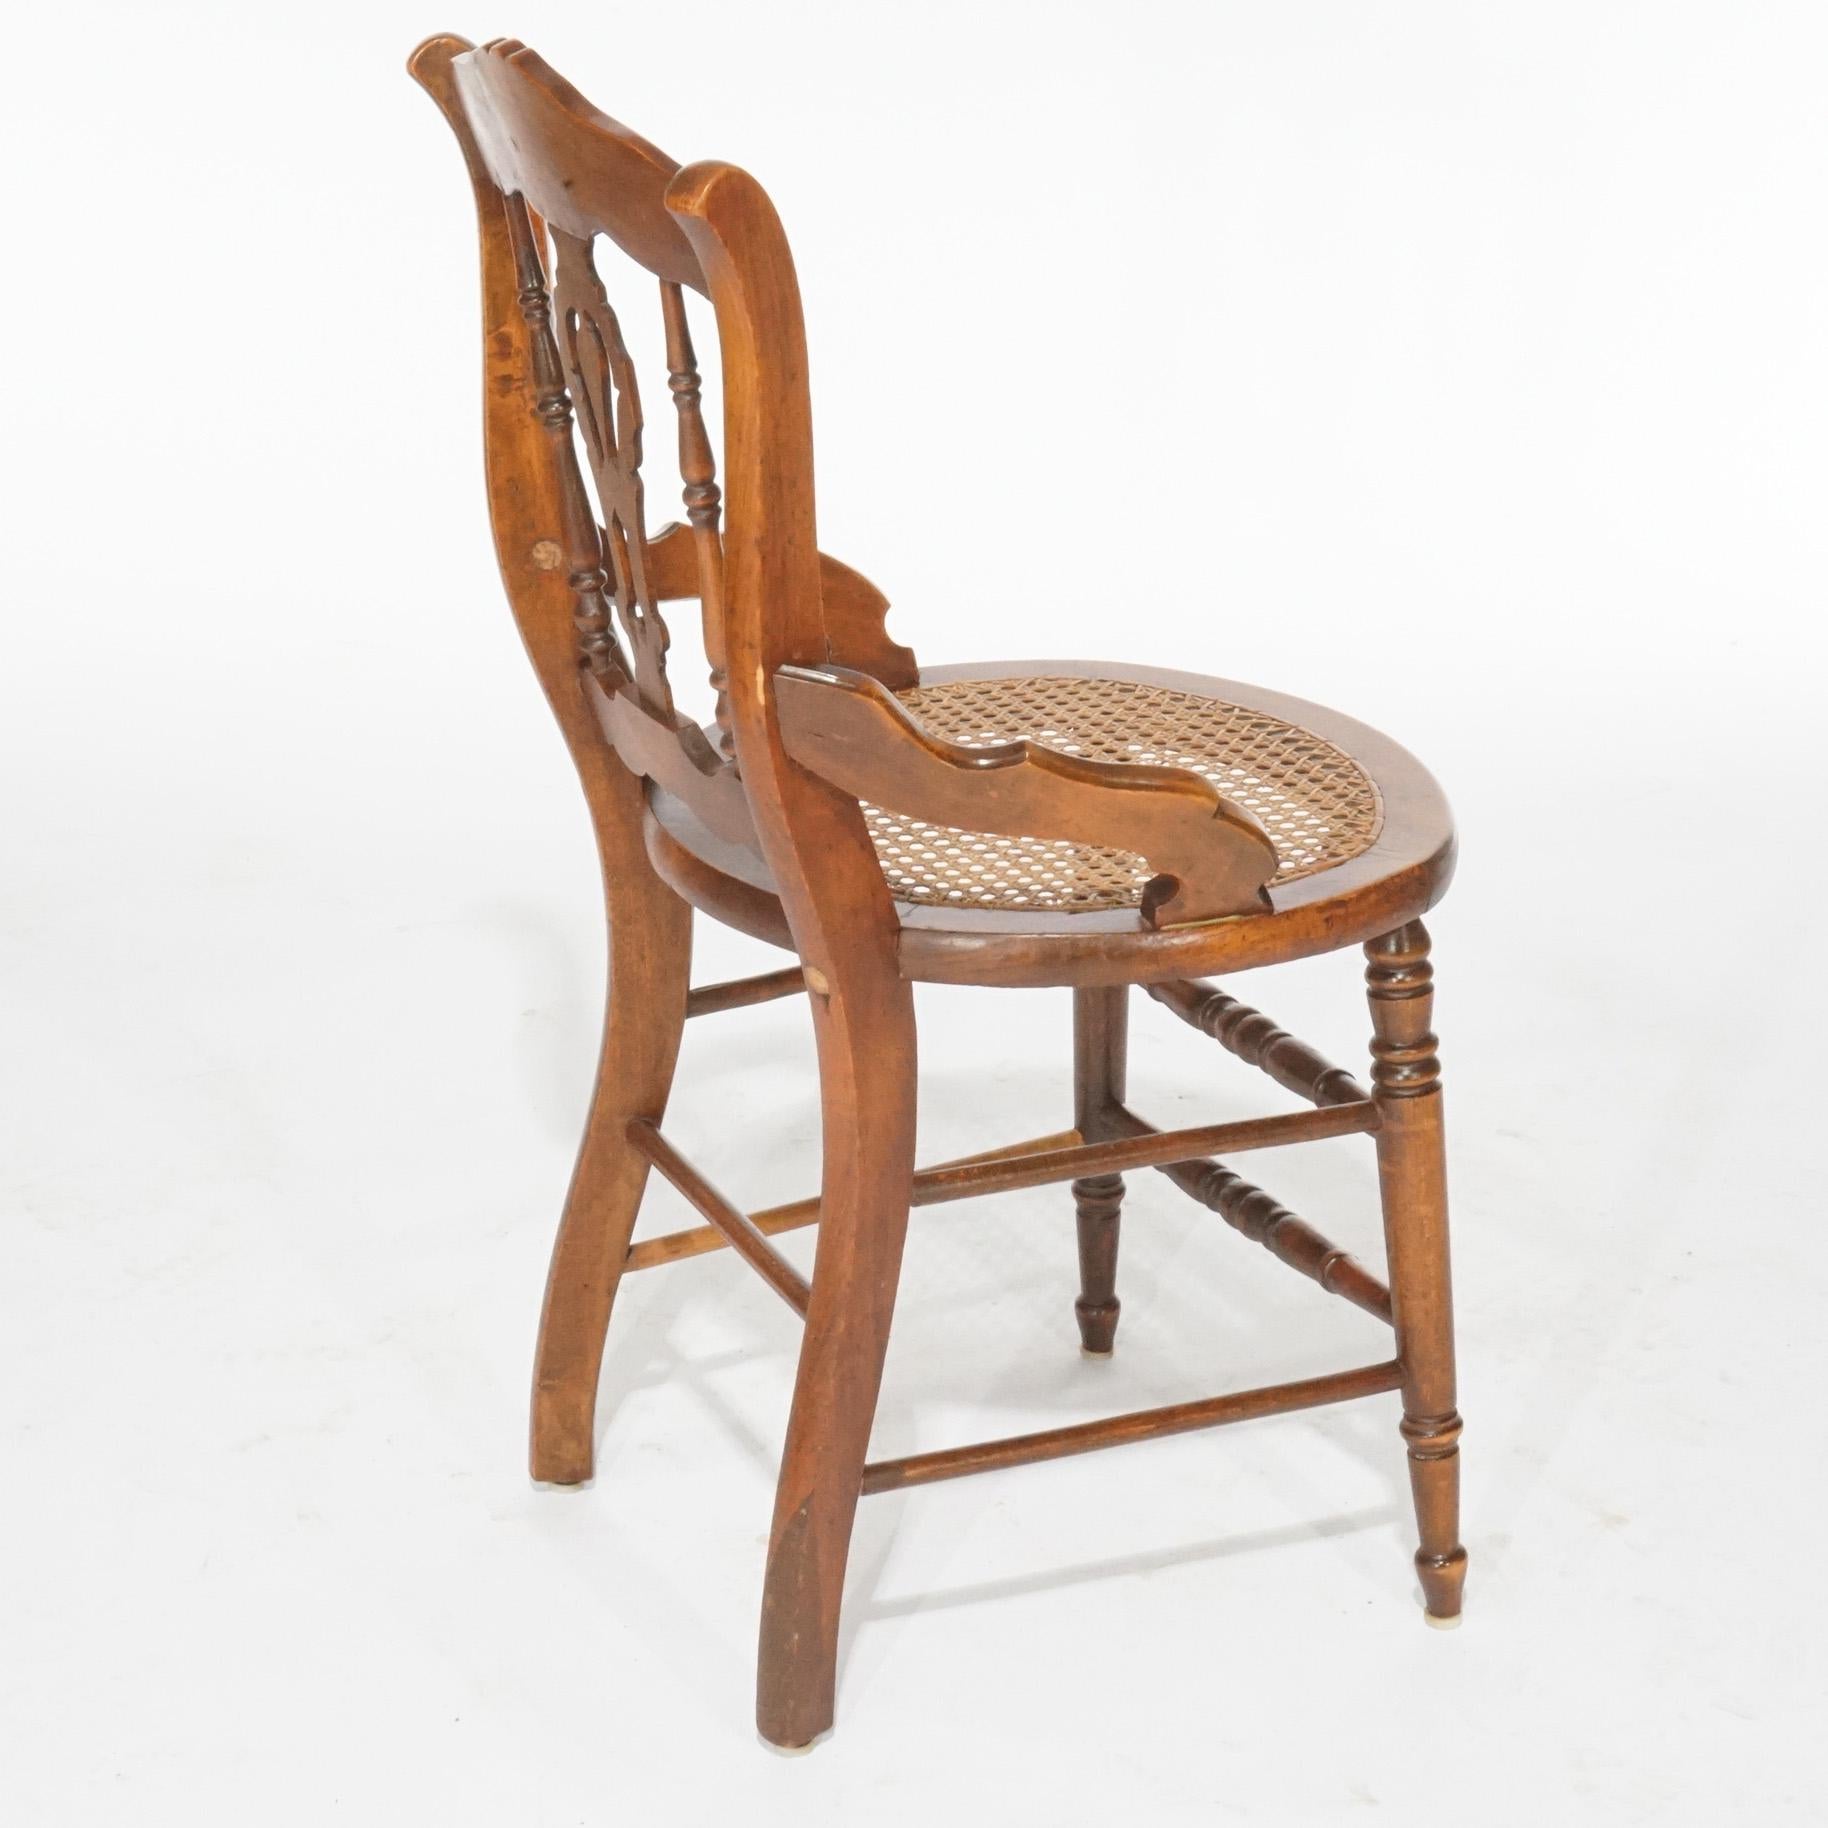 American Antique Set of Four Victorian Walnut, Burl & Cane Seat Dining Chairs, Circa 1890 For Sale